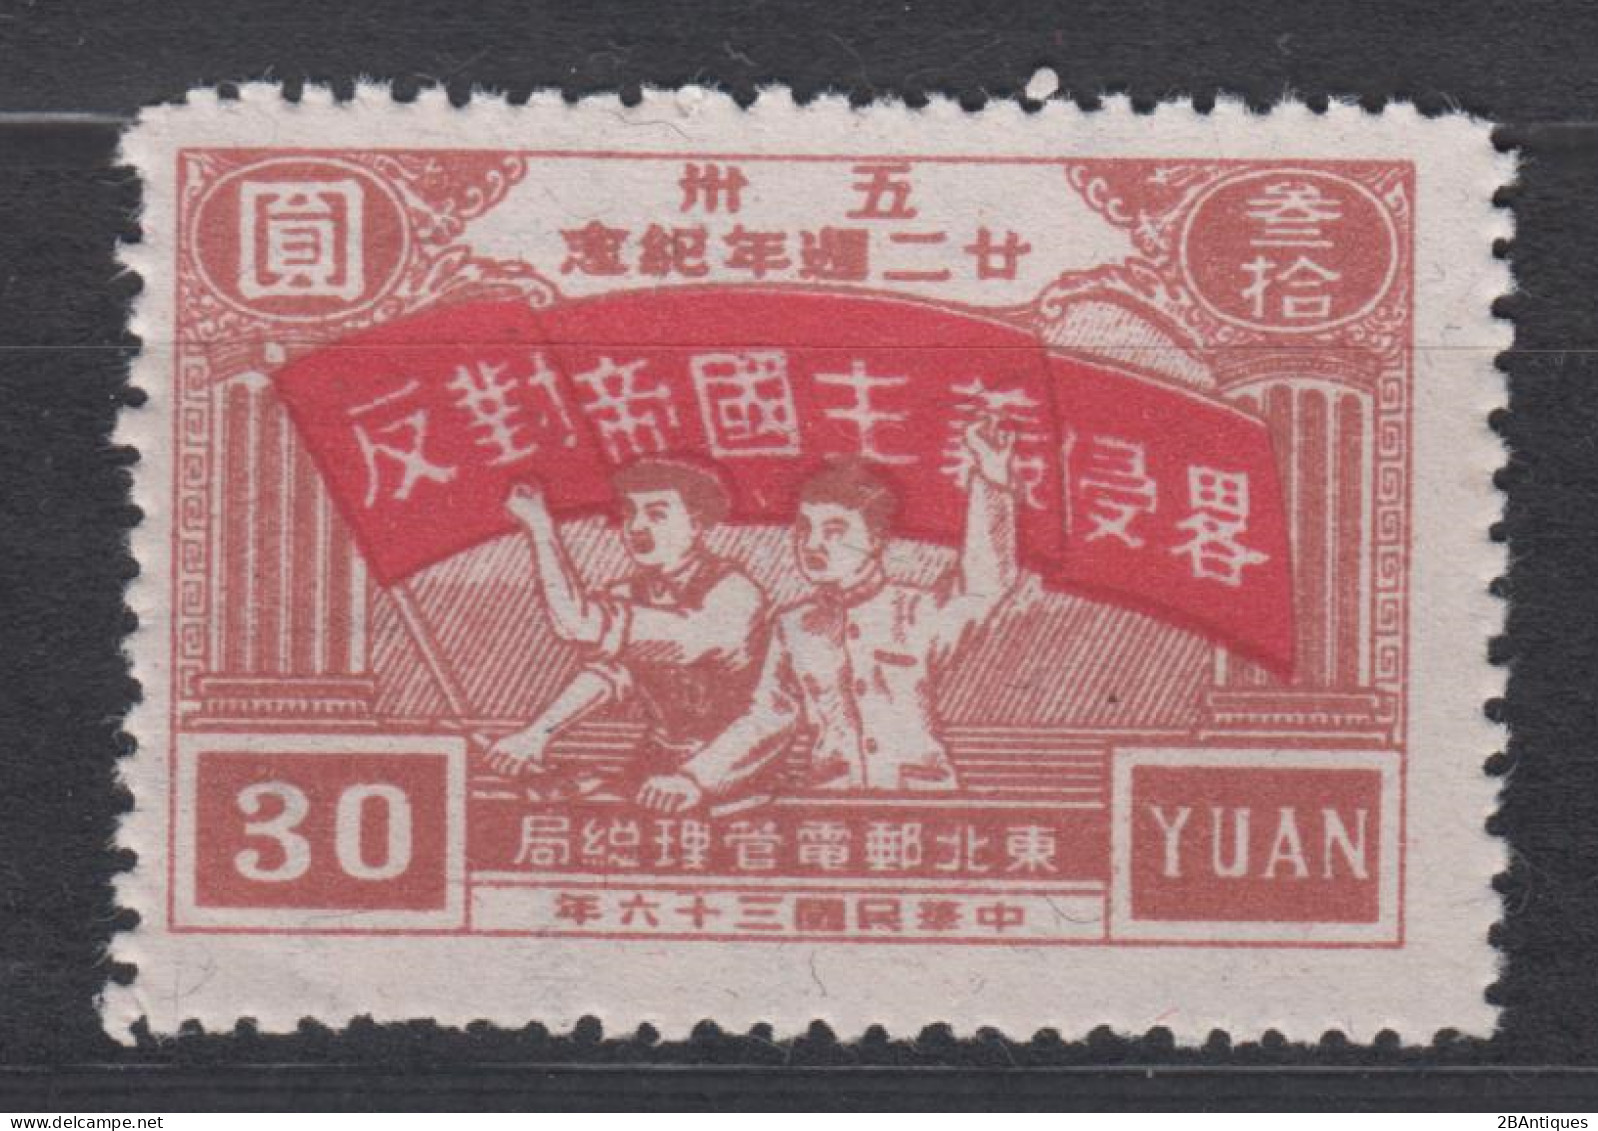 NORTHEAST CHINA 1947 - The 22th Anniversary Of Nanking Road Incident MNGAI - Chine Du Nord-Est 1946-48